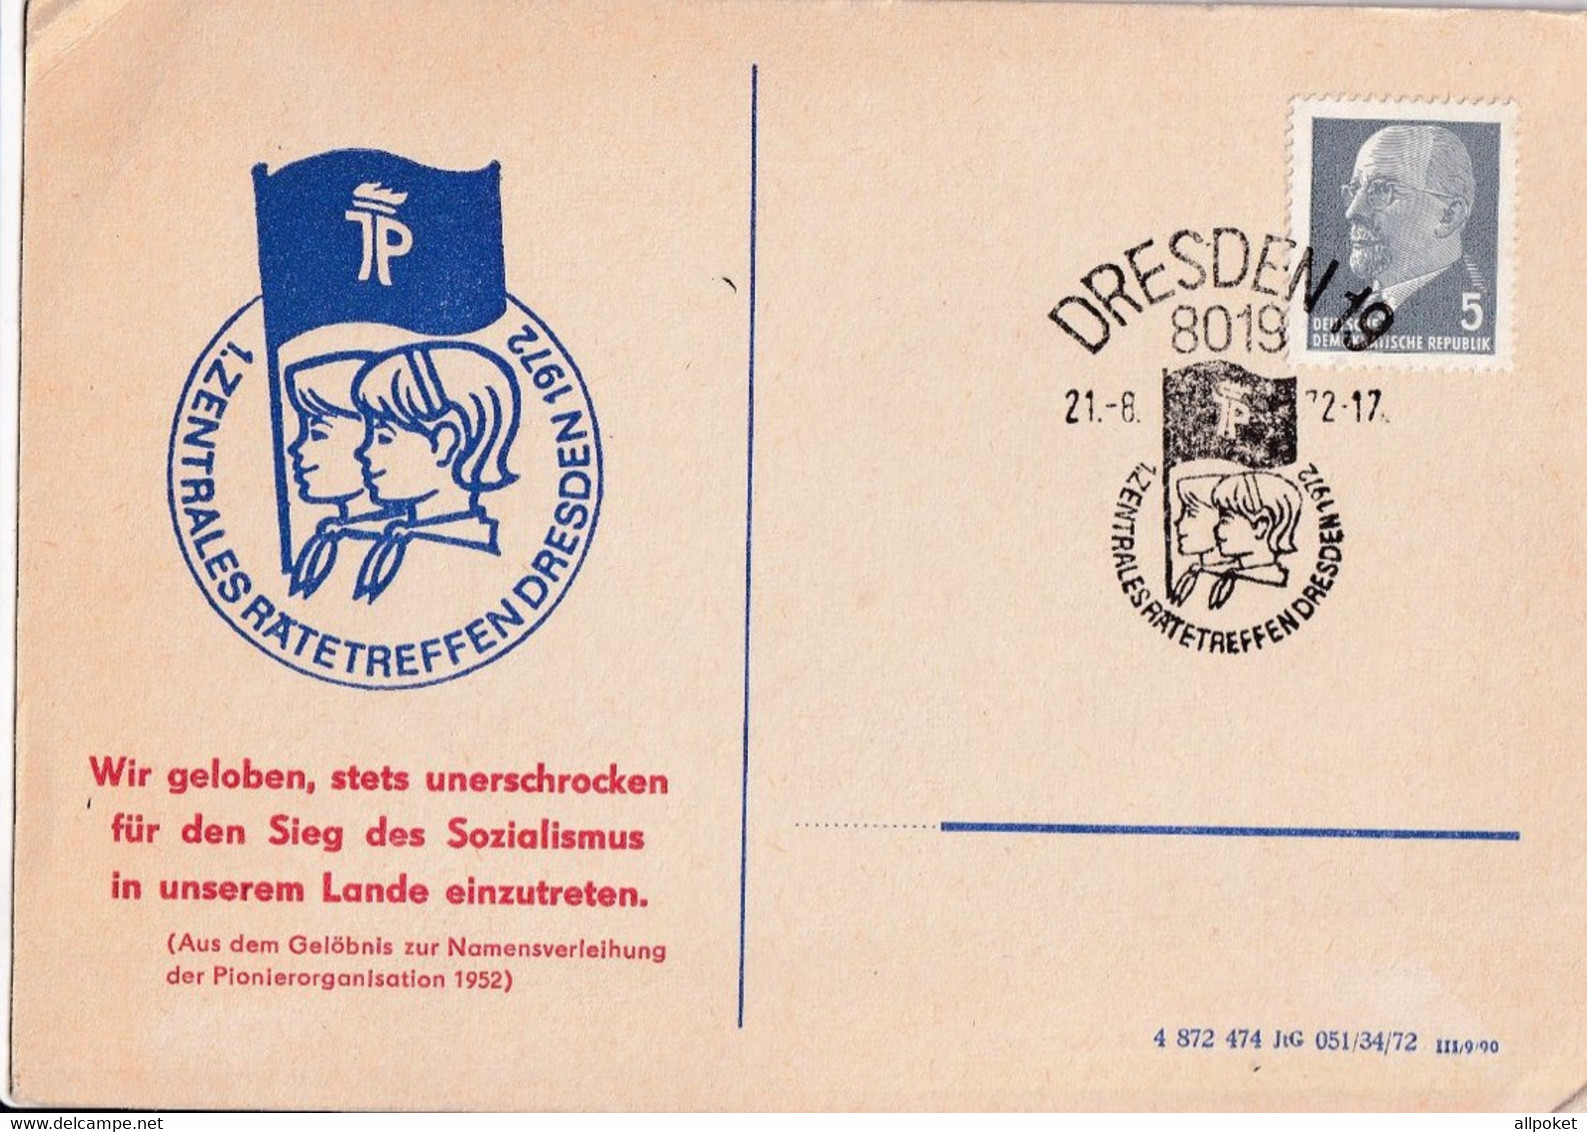 A14402 - ZENTRALES RATTETREFFEND DRESDEN IP SCOUTS DRESDEN GERMANY 1972 - Postales Privados - Usados